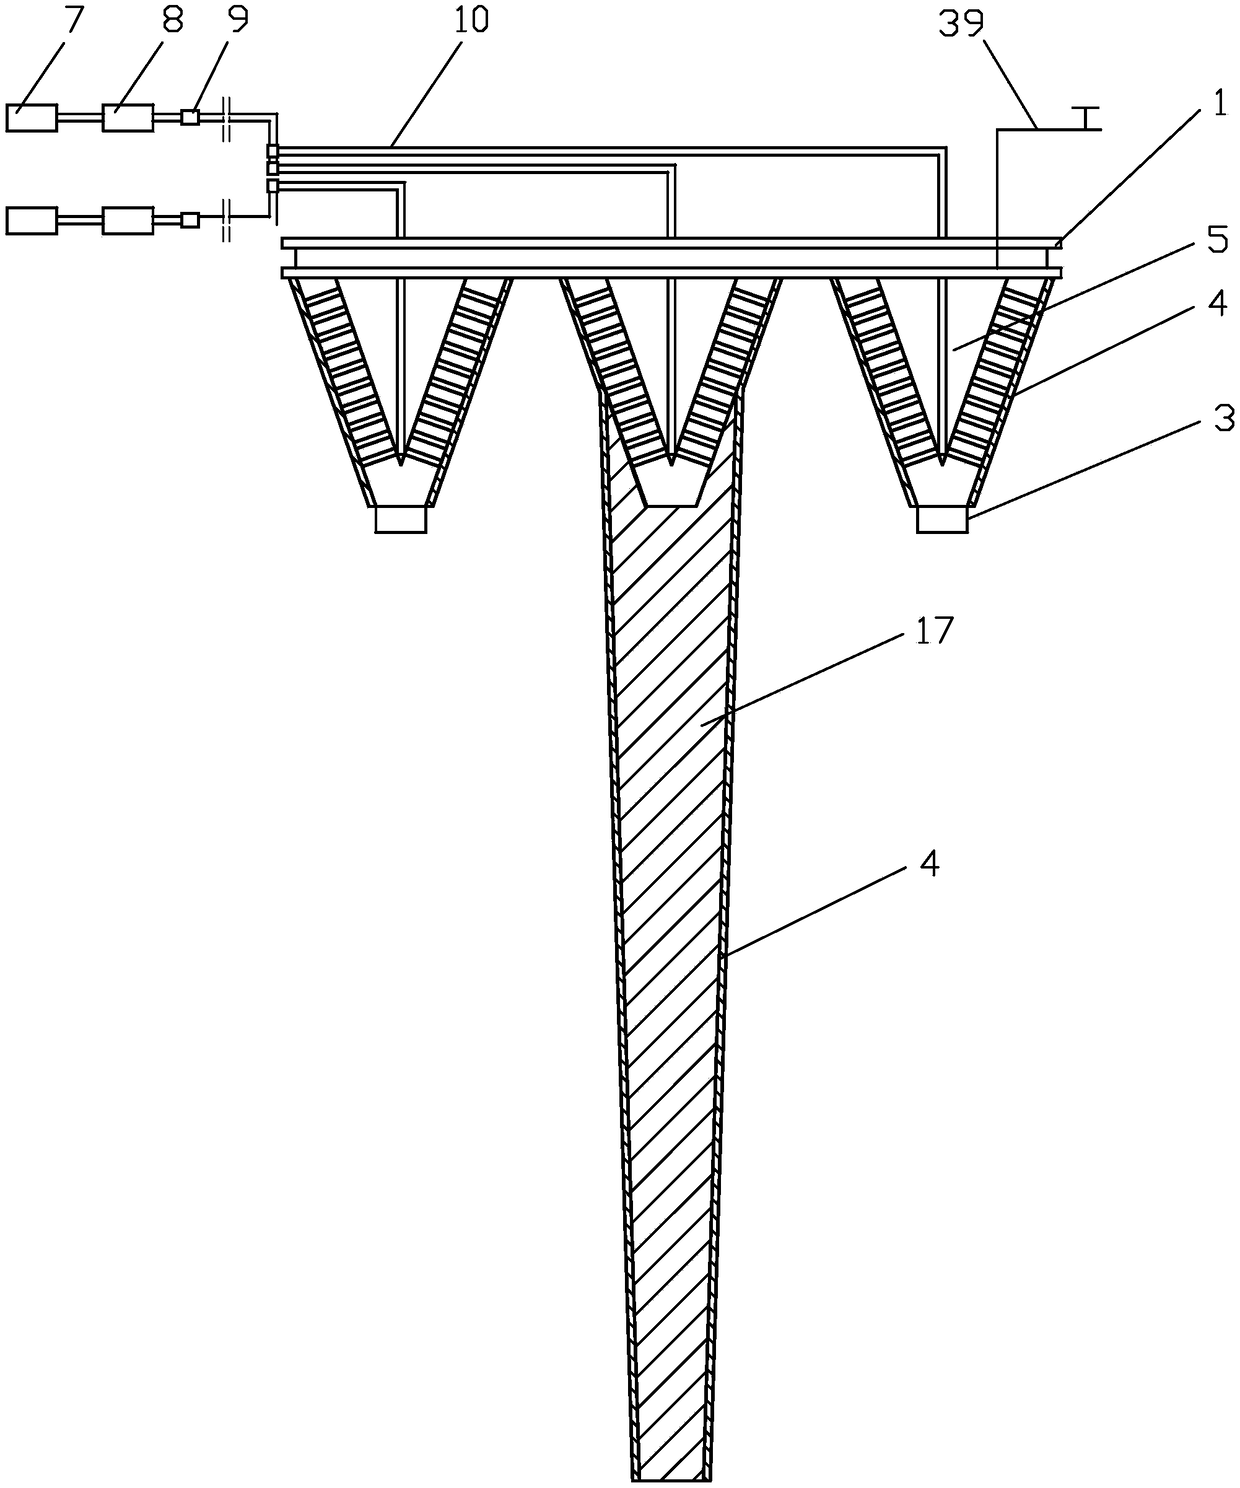 Modular soil compaction molding device applicable for treatment of deep and shallow soft soil foundations